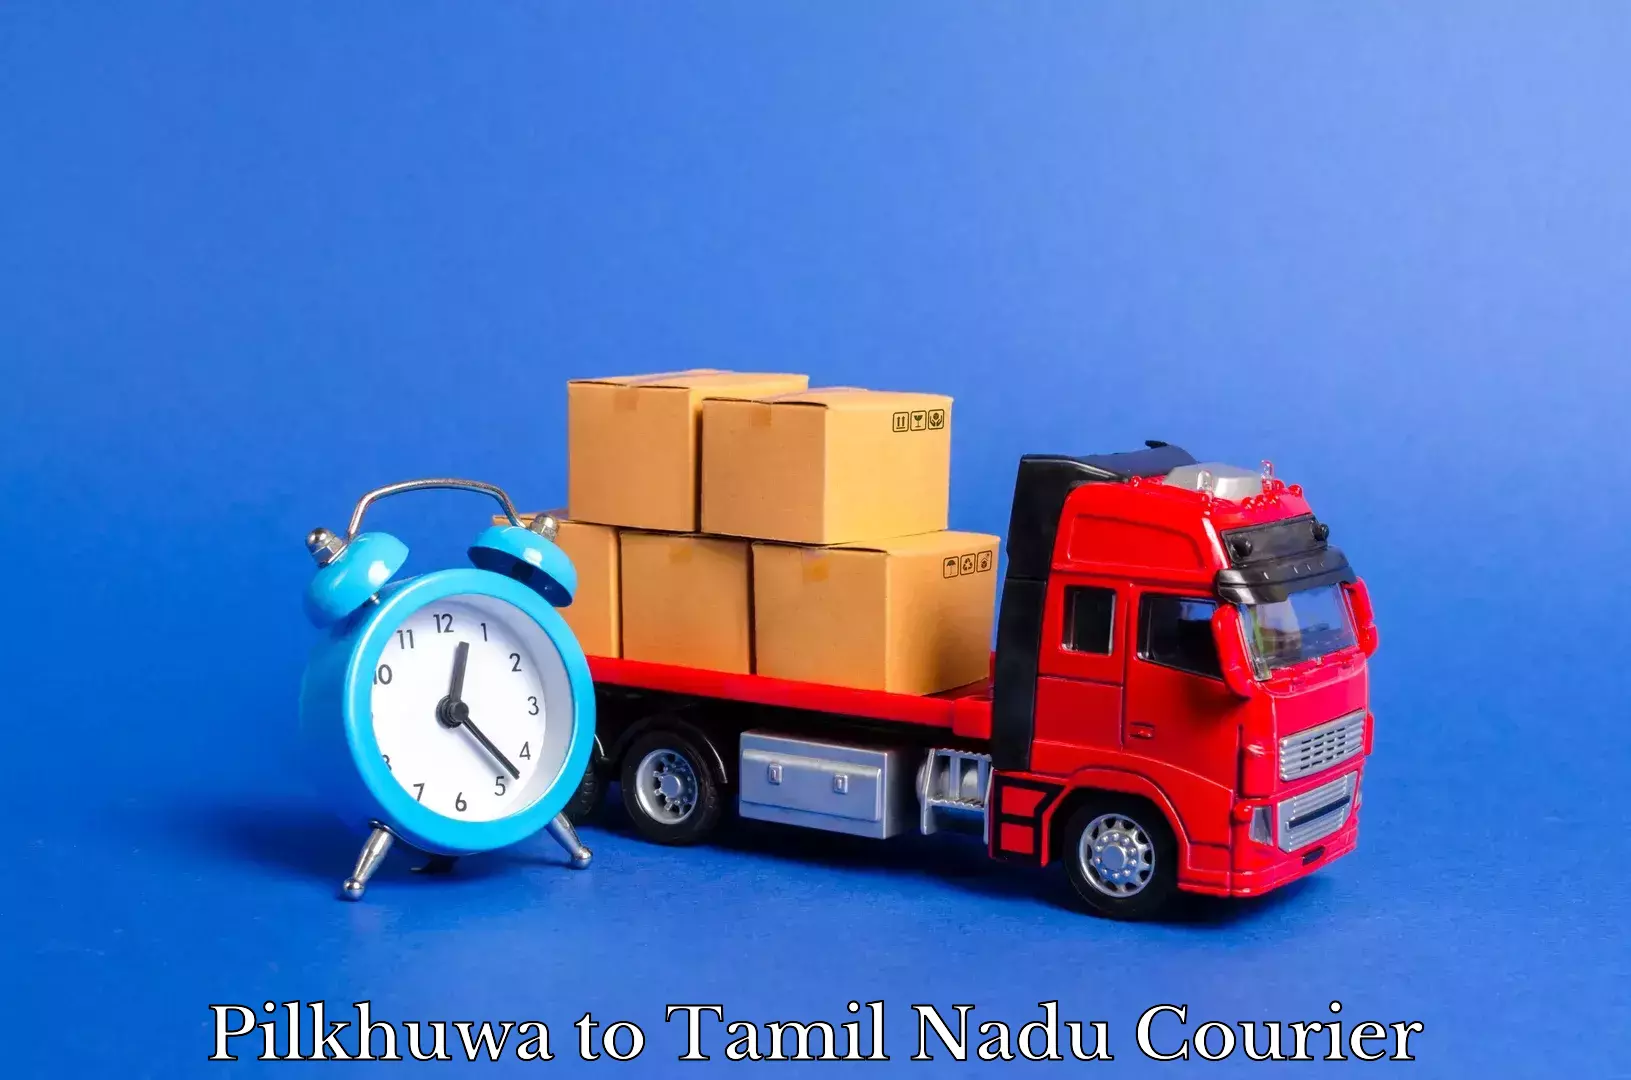 Quality relocation assistance in Pilkhuwa to Periyakulam